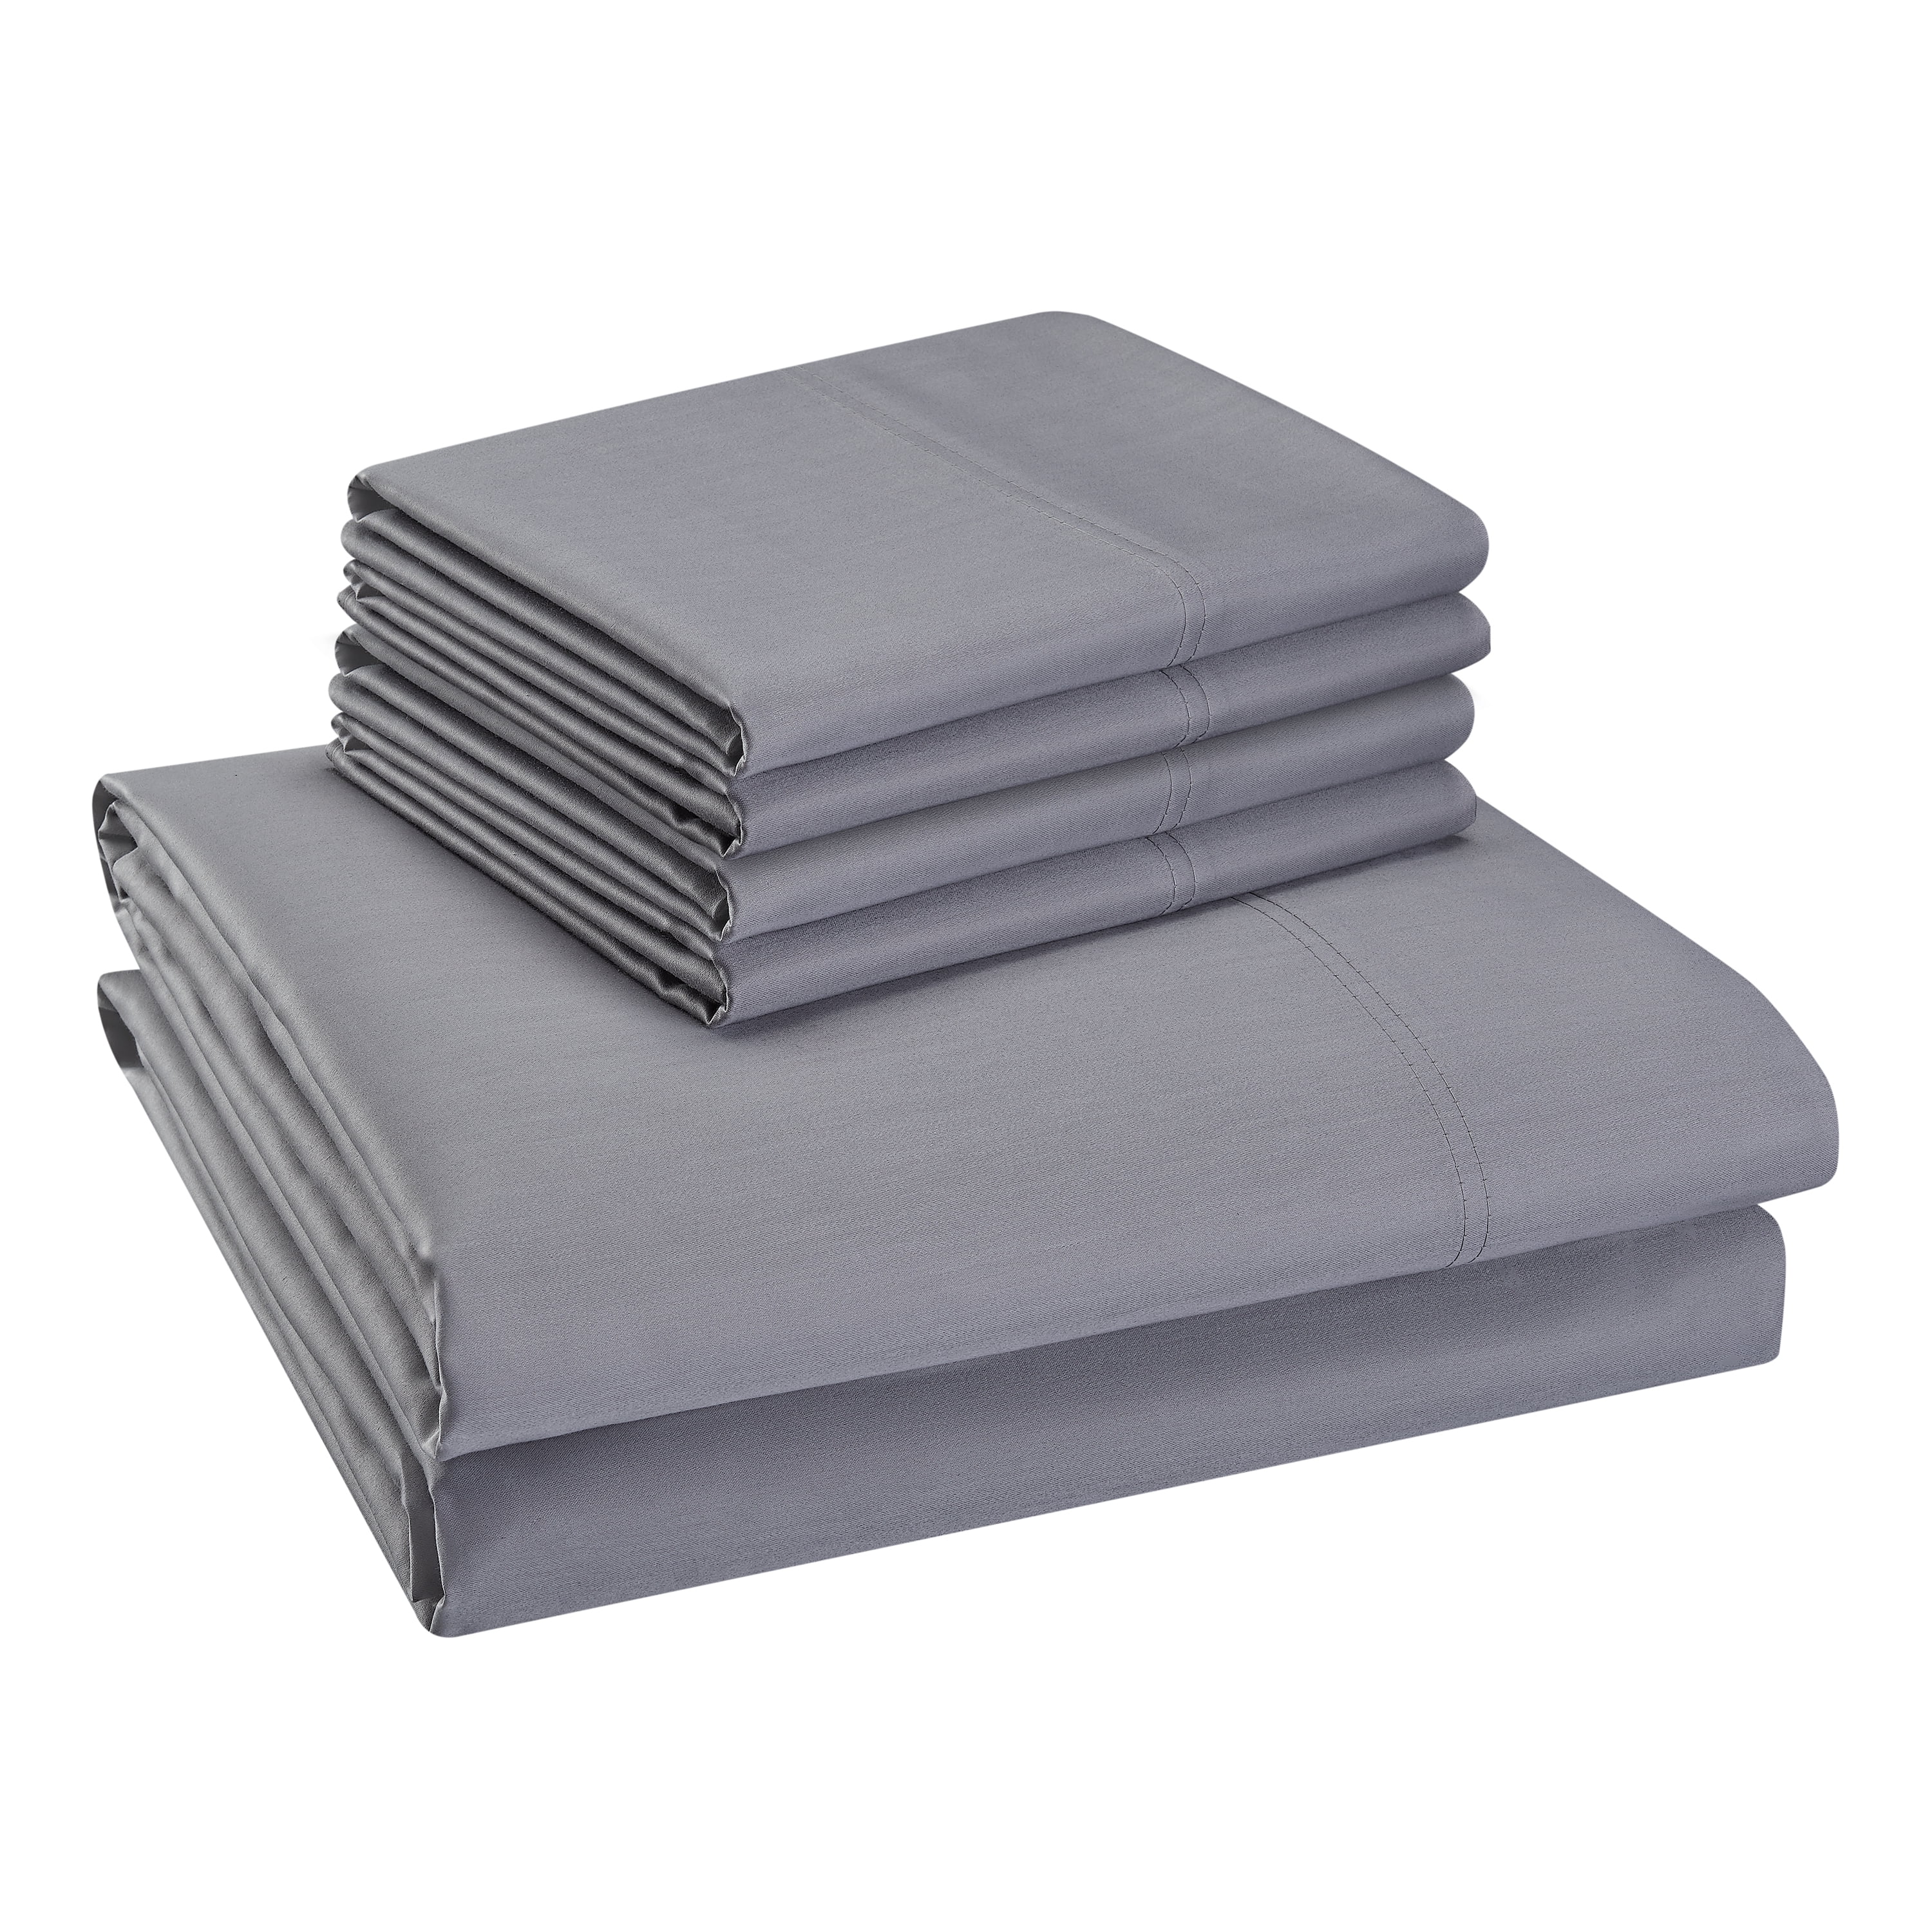 Hotel Style 800 Thread Count Cotton Rich Sateen Bed Sheet Set, Queen, Gray,  Set of 6 